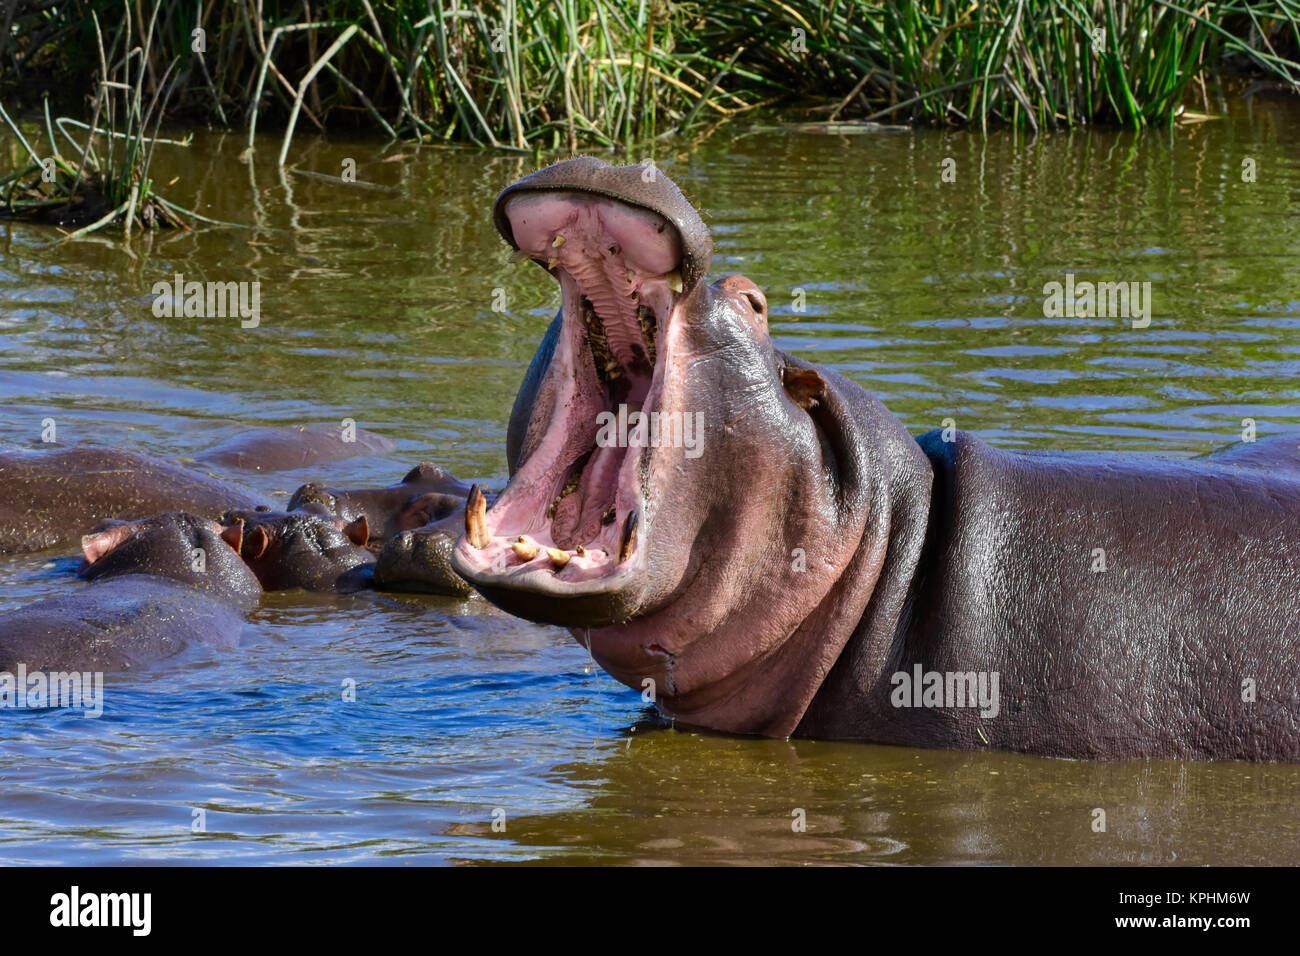 Ngorongoro crater, a World Heritage Site in Tanzania. Incredible wildlife variety for enjoyment by tourists. Hippo bull yawning in aggression. Stock Photo